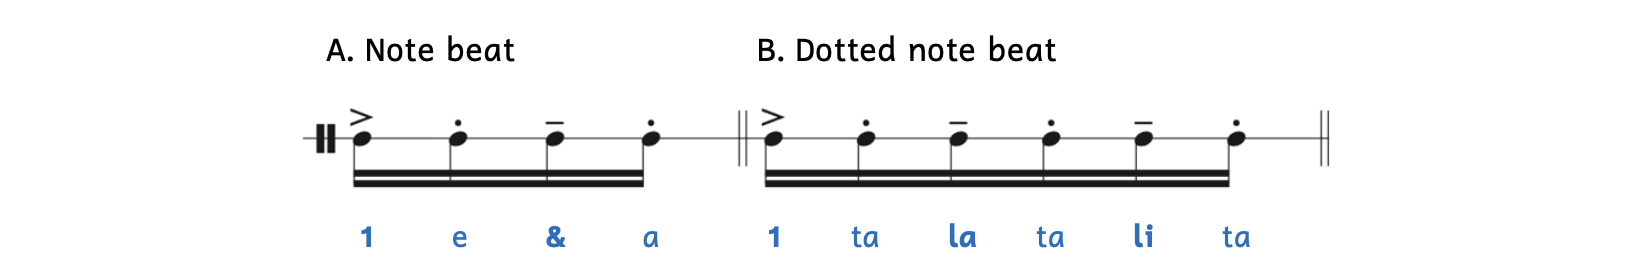 Weighted parts of beats. Example A shows the subdivision of a quarter note, which is four sixteenth notes. The first note on "1" is the strongest, the second note on "ee" is weak, the third note on "and" is less strong, and the fourth note on "uh" is weak. Example B shows the subdivision of a dotted quarter note, which is six sixteenth notes. The first note on "1" is the strongest, the second note on "tah" is weak, the third note on "la" is less strong, the fourth note on "tah" is weak, the fifth note on "lee" is less strong, and the last note on "tah" is weak.